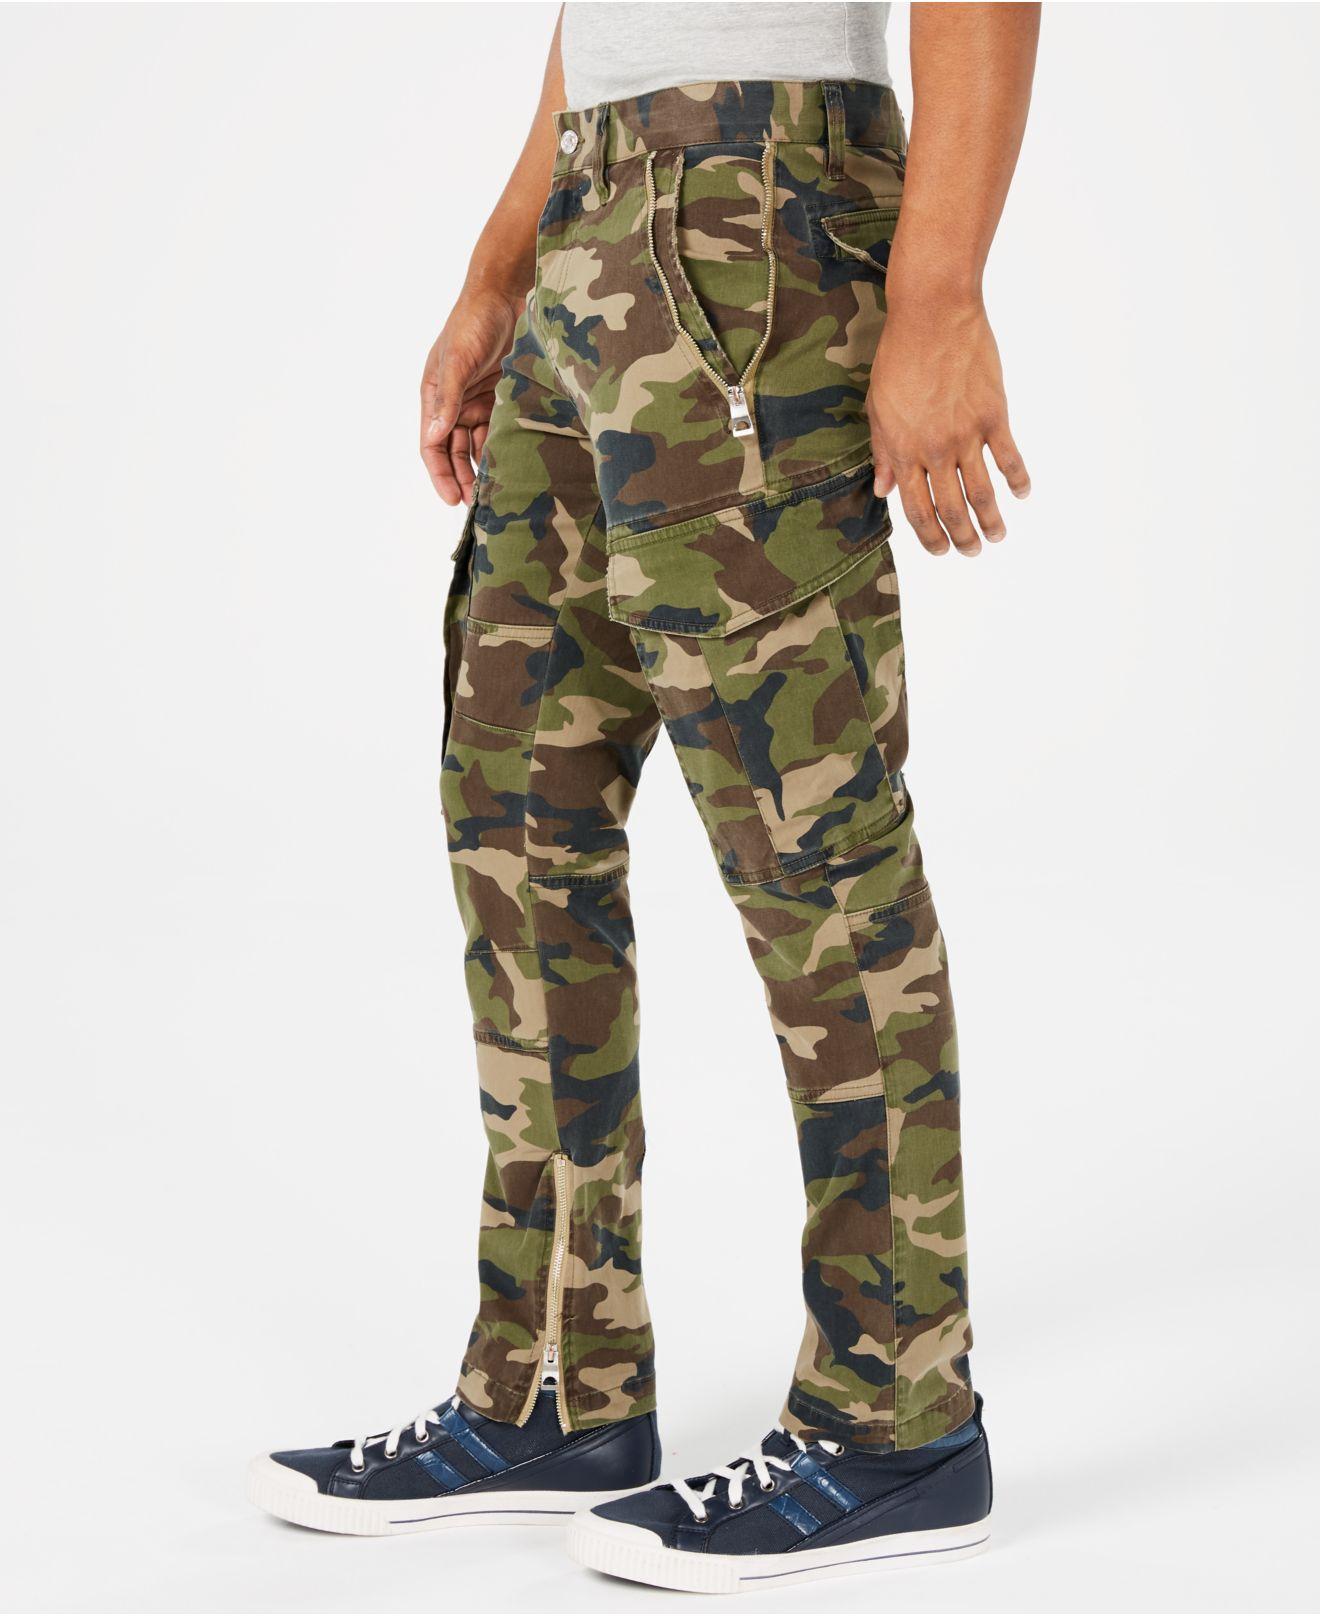 Guess Cotton Carter Twill Camo Cargo Pants in Green for Men - Lyst